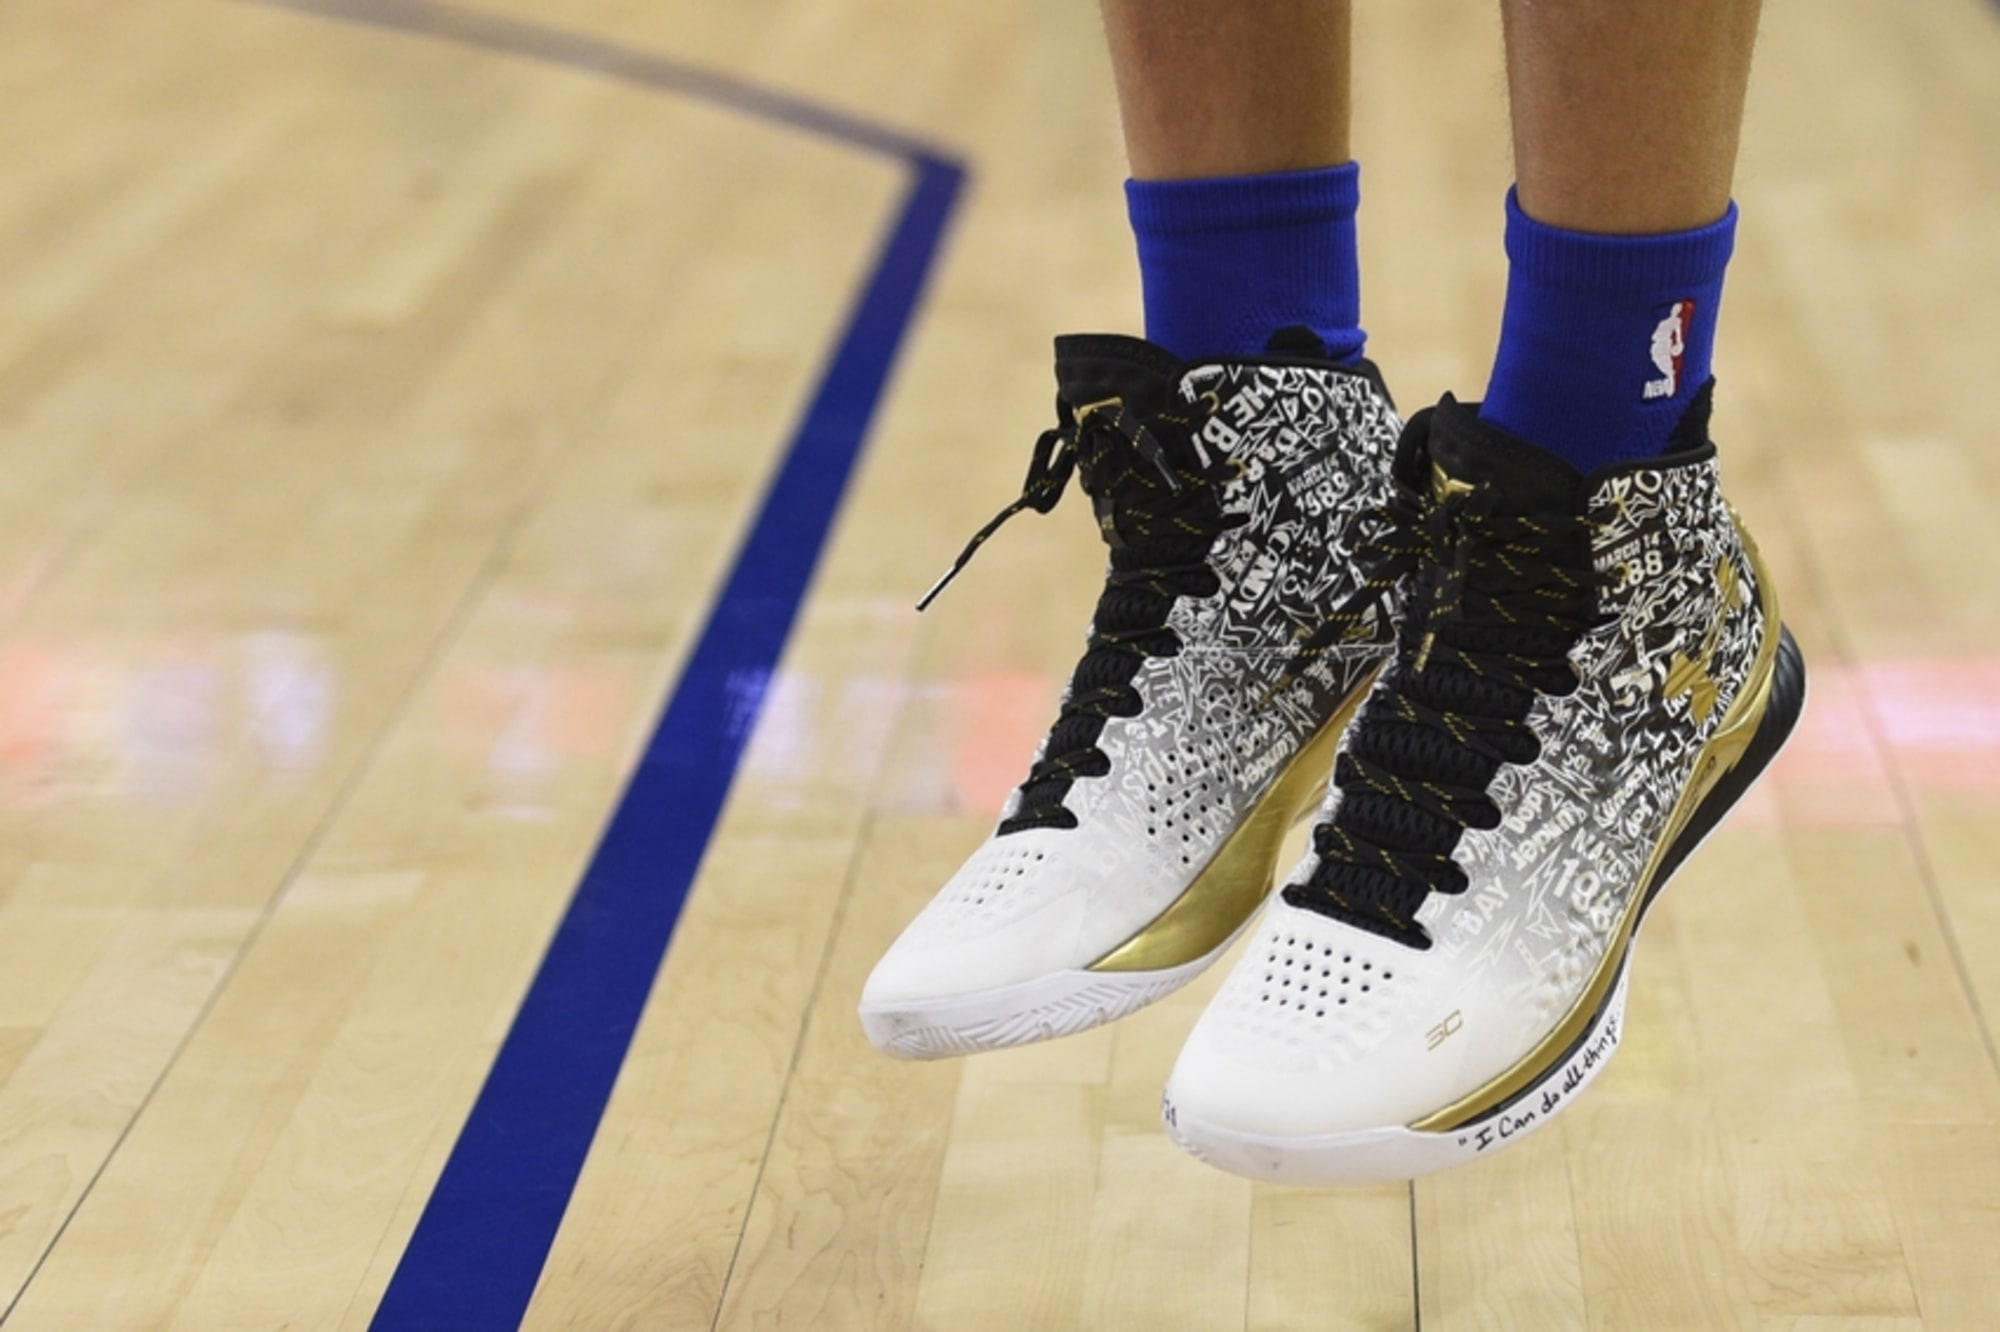 Steph Curry: How to buy 'Back 2 Back' MVP shoes